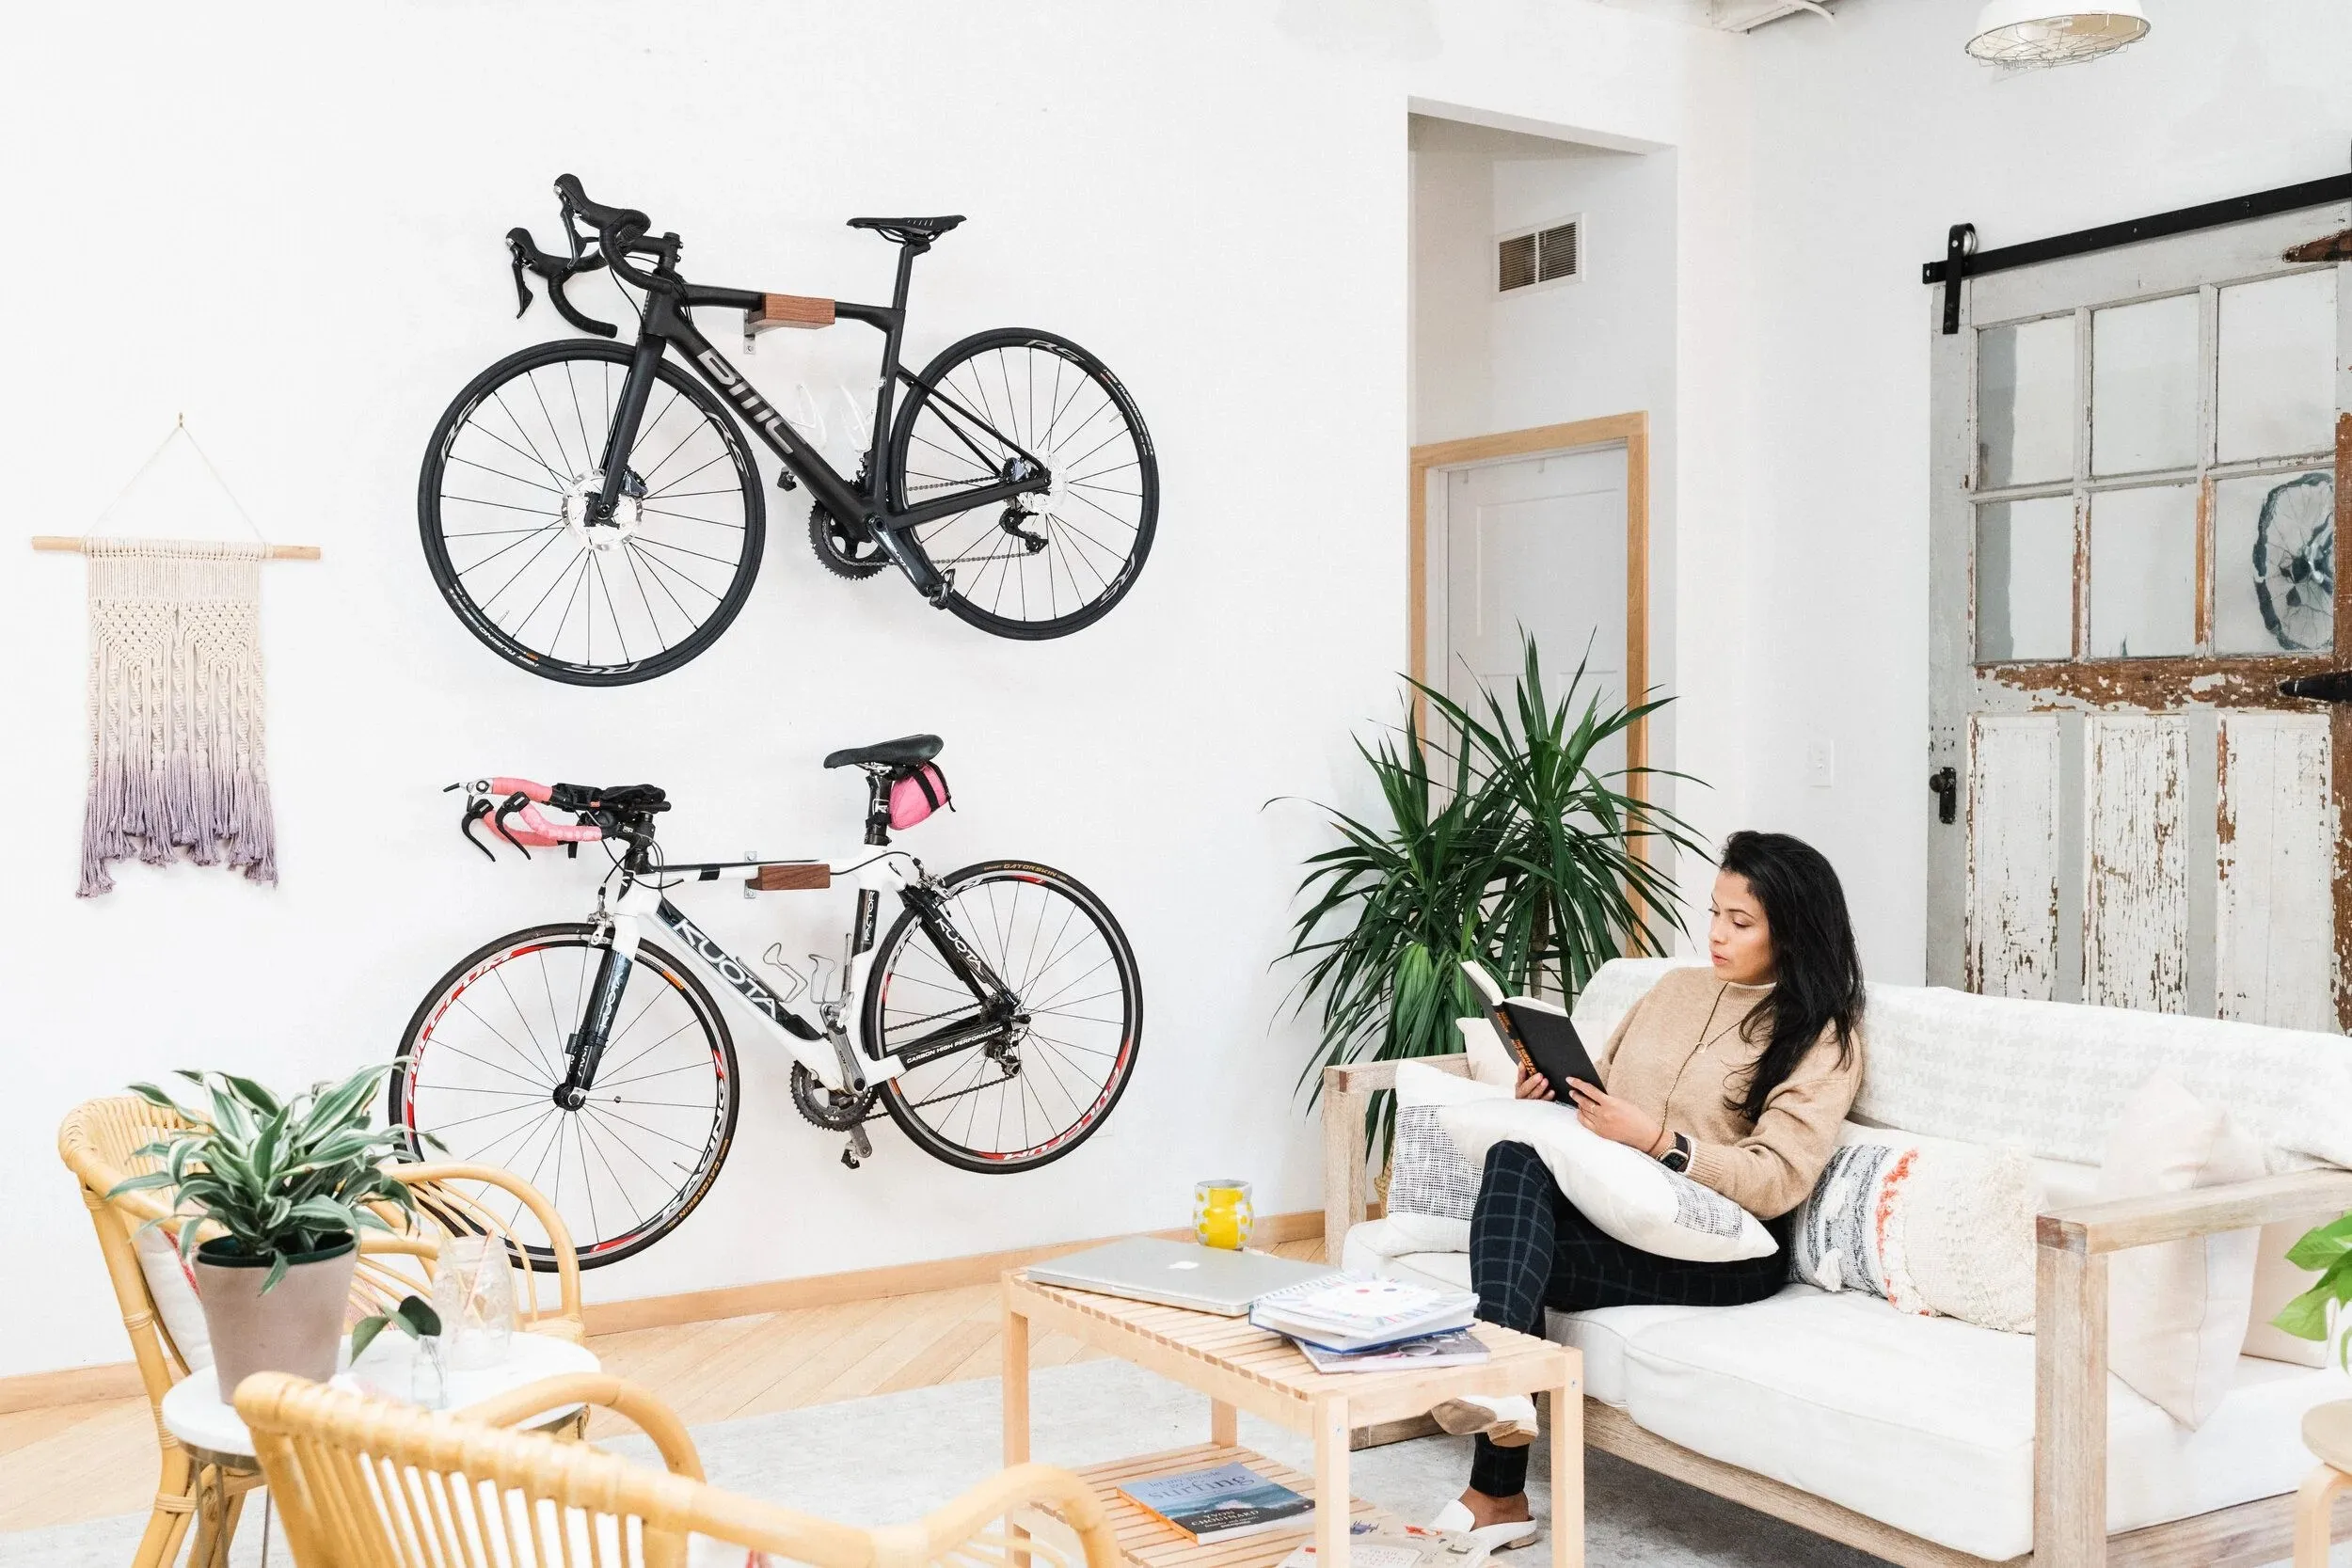 Mount Your Bike on a Wall